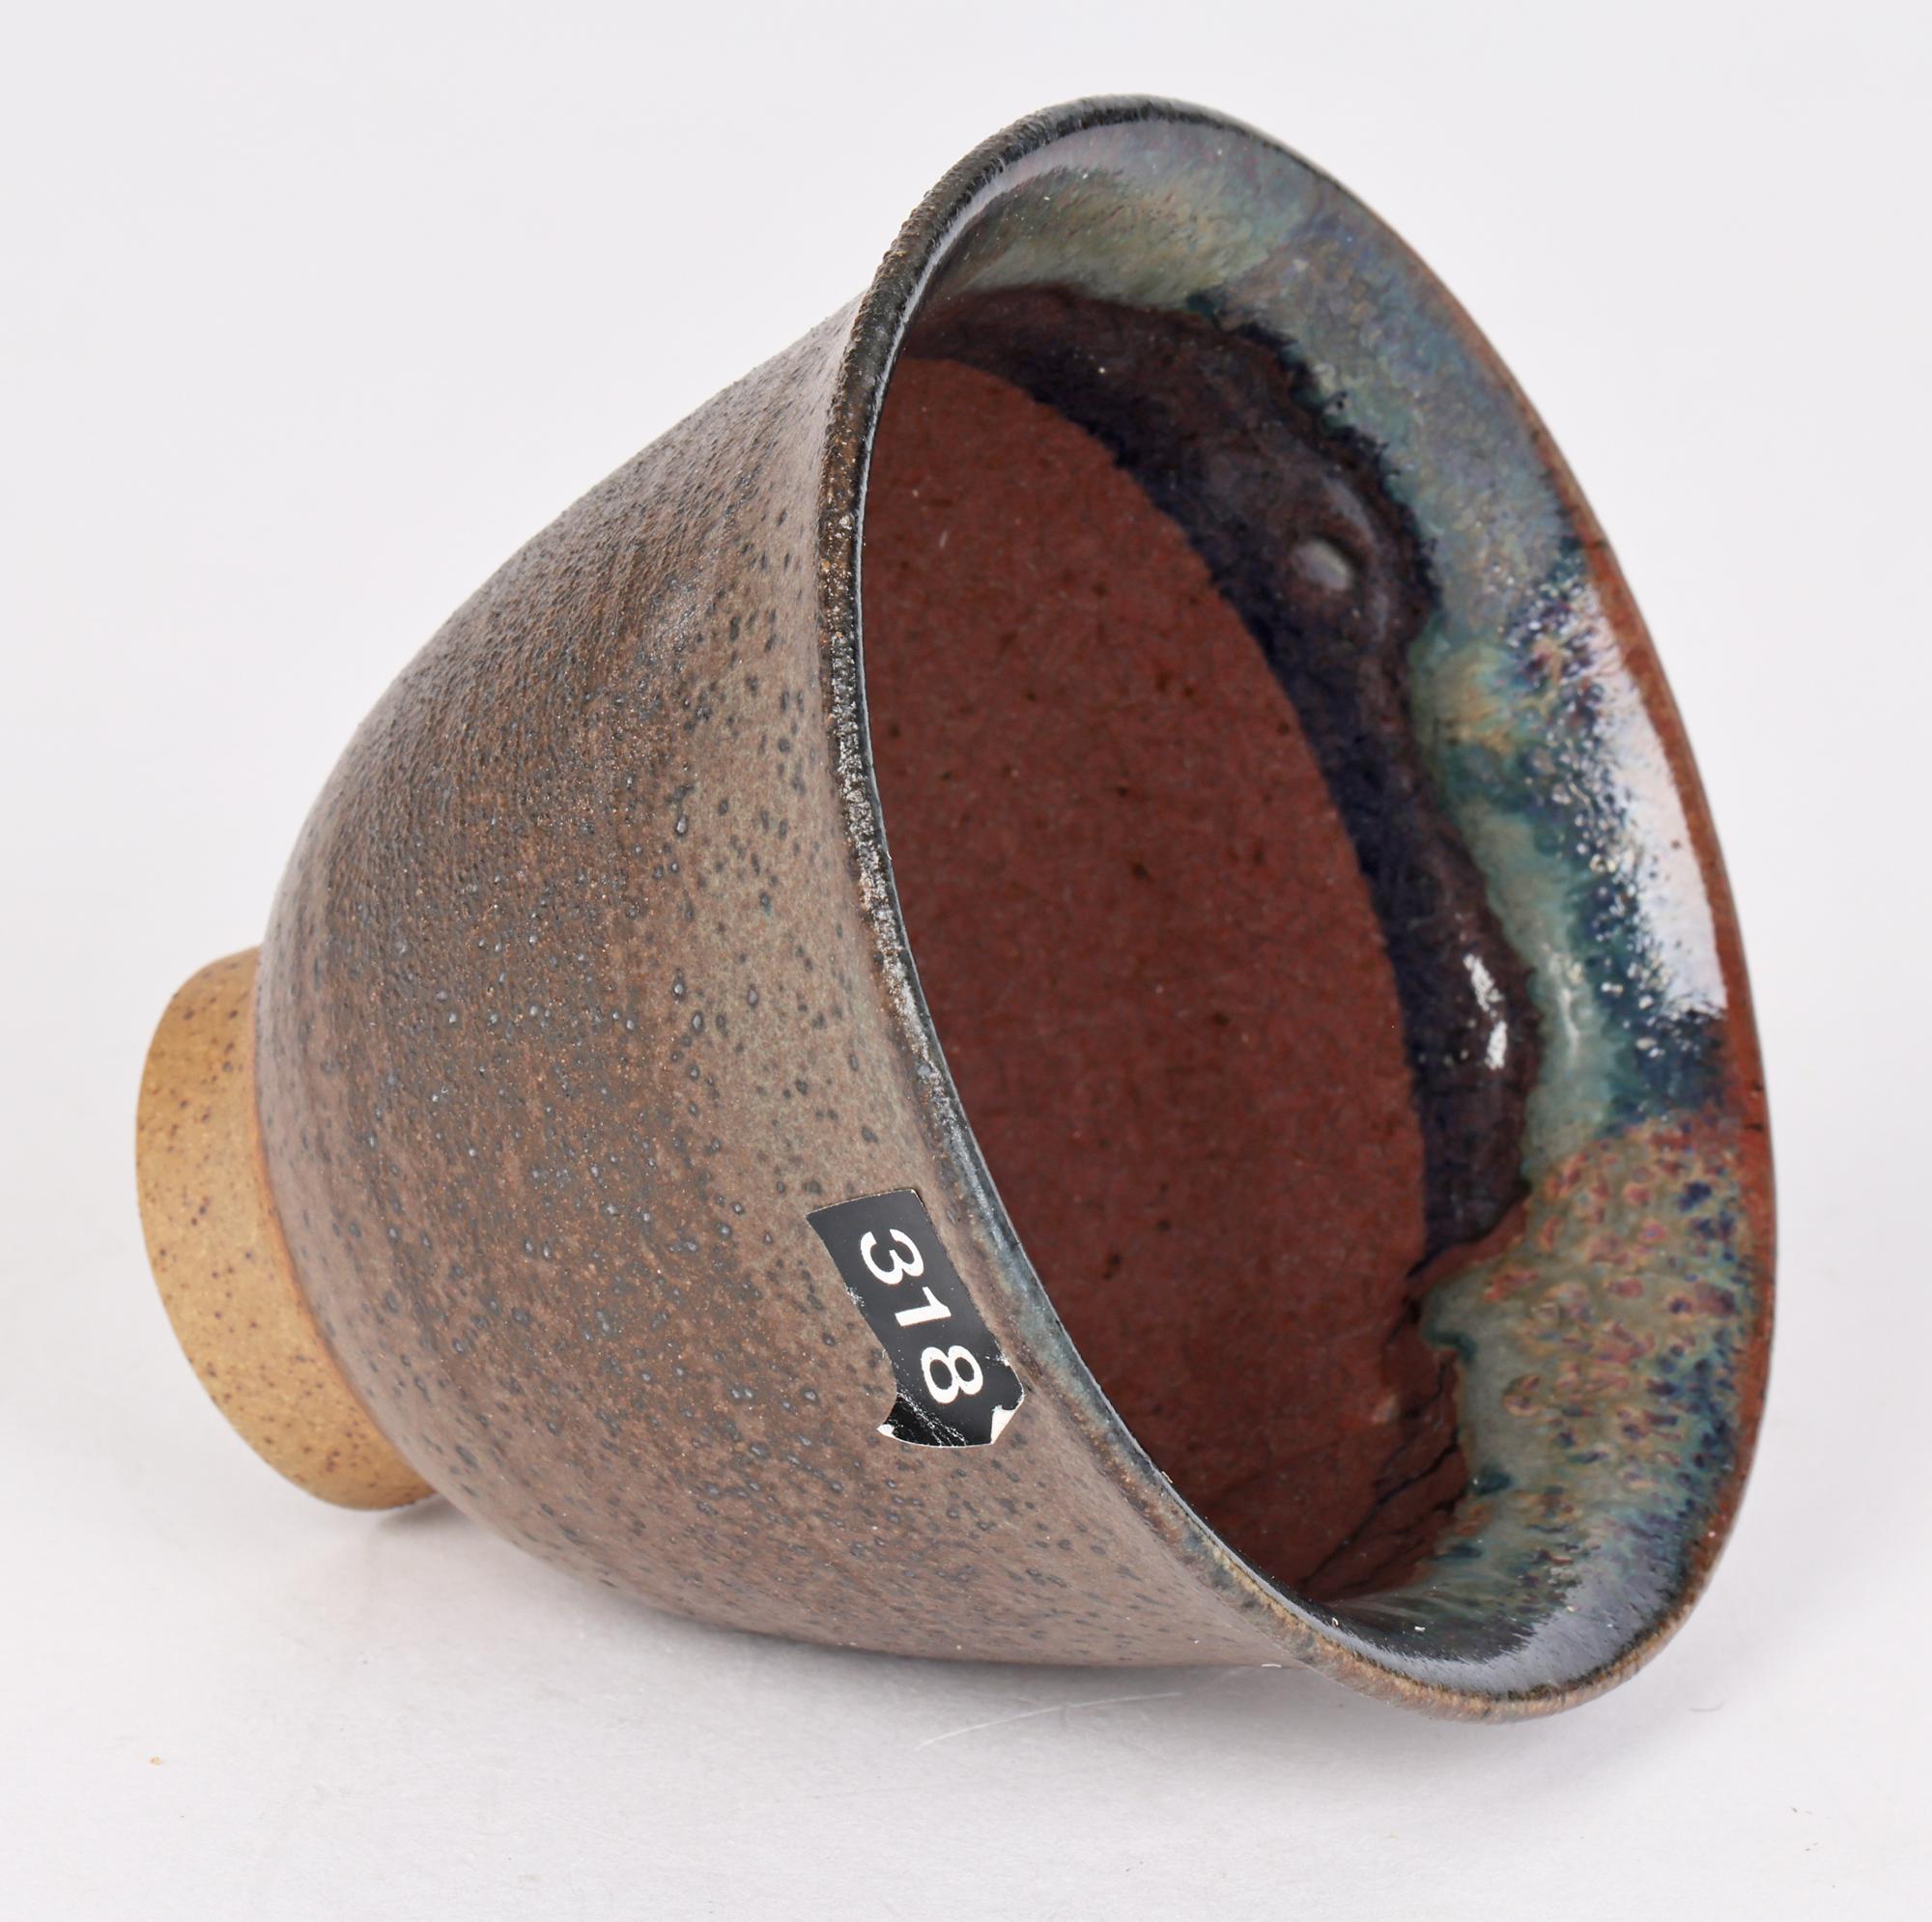 Eric James Mellon Studio Pottery Experimental Glazed Cup 2006  In Good Condition For Sale In Bishop's Stortford, Hertfordshire